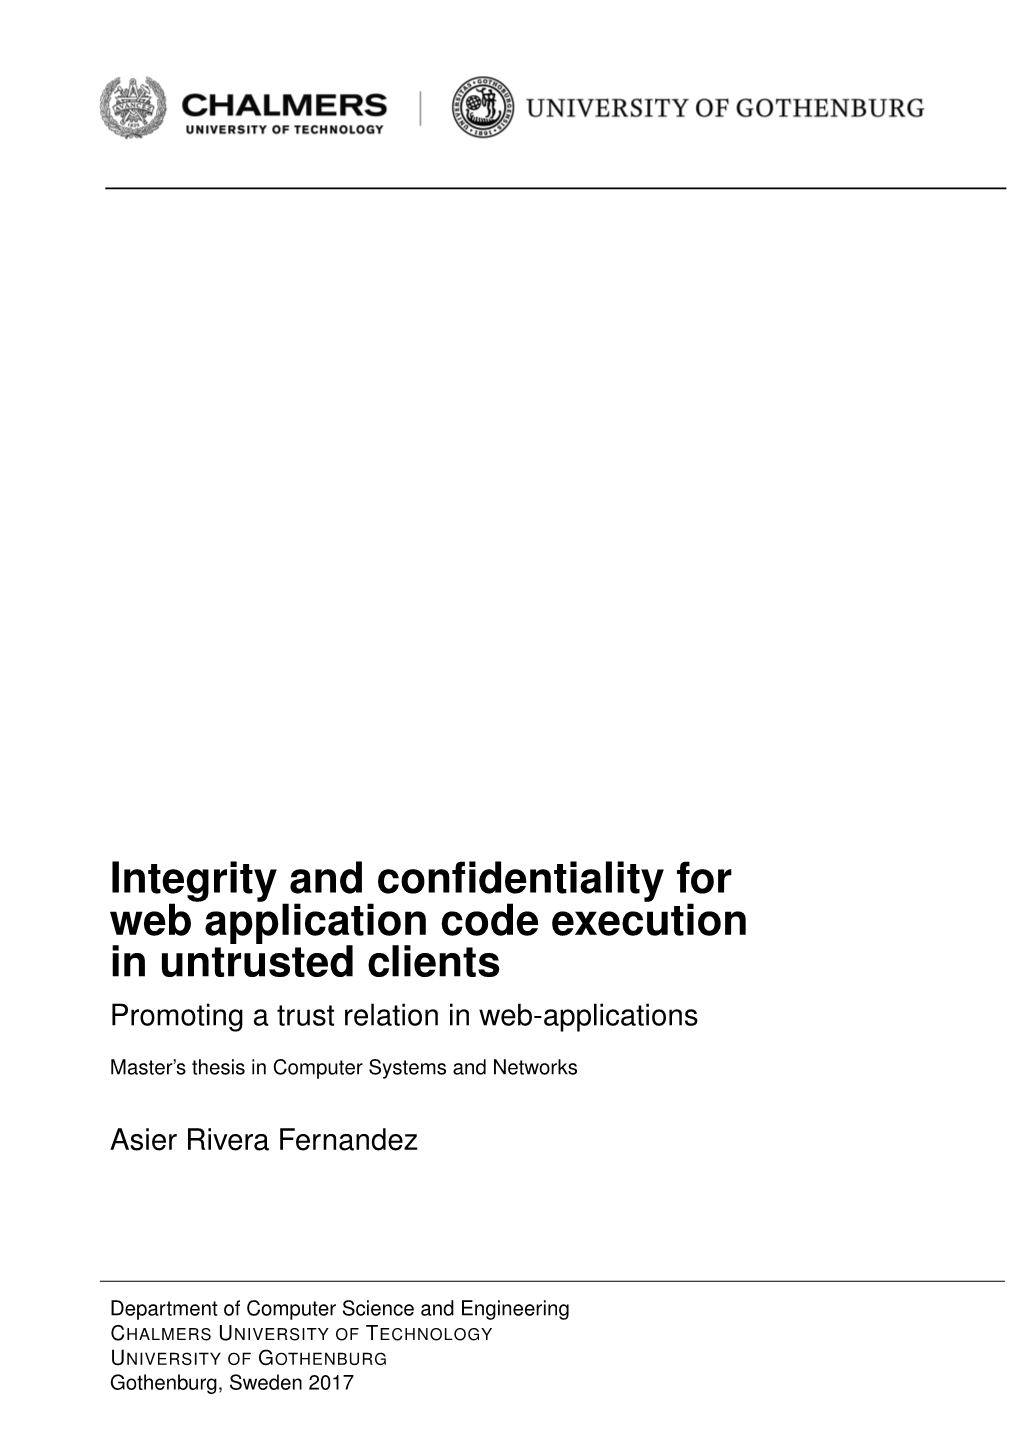 Integrity and Confidentiality for Web Application Code Execution In